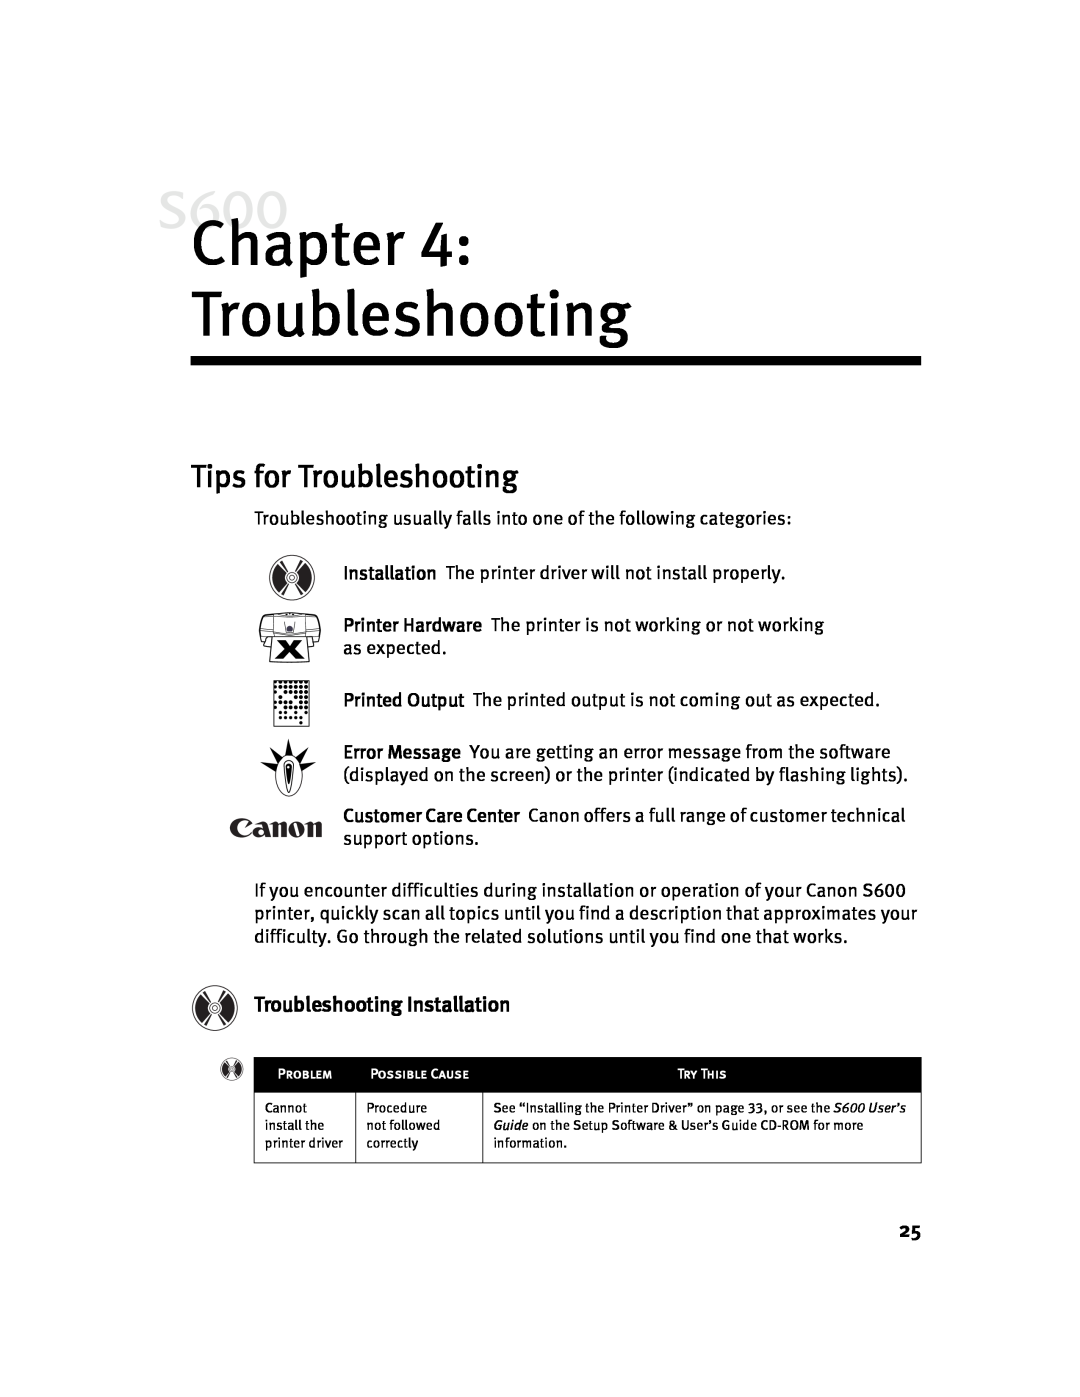 Canon S600 quick start Chapter Troubleshooting, Tips for Troubleshooting, Troubleshooting Installation 